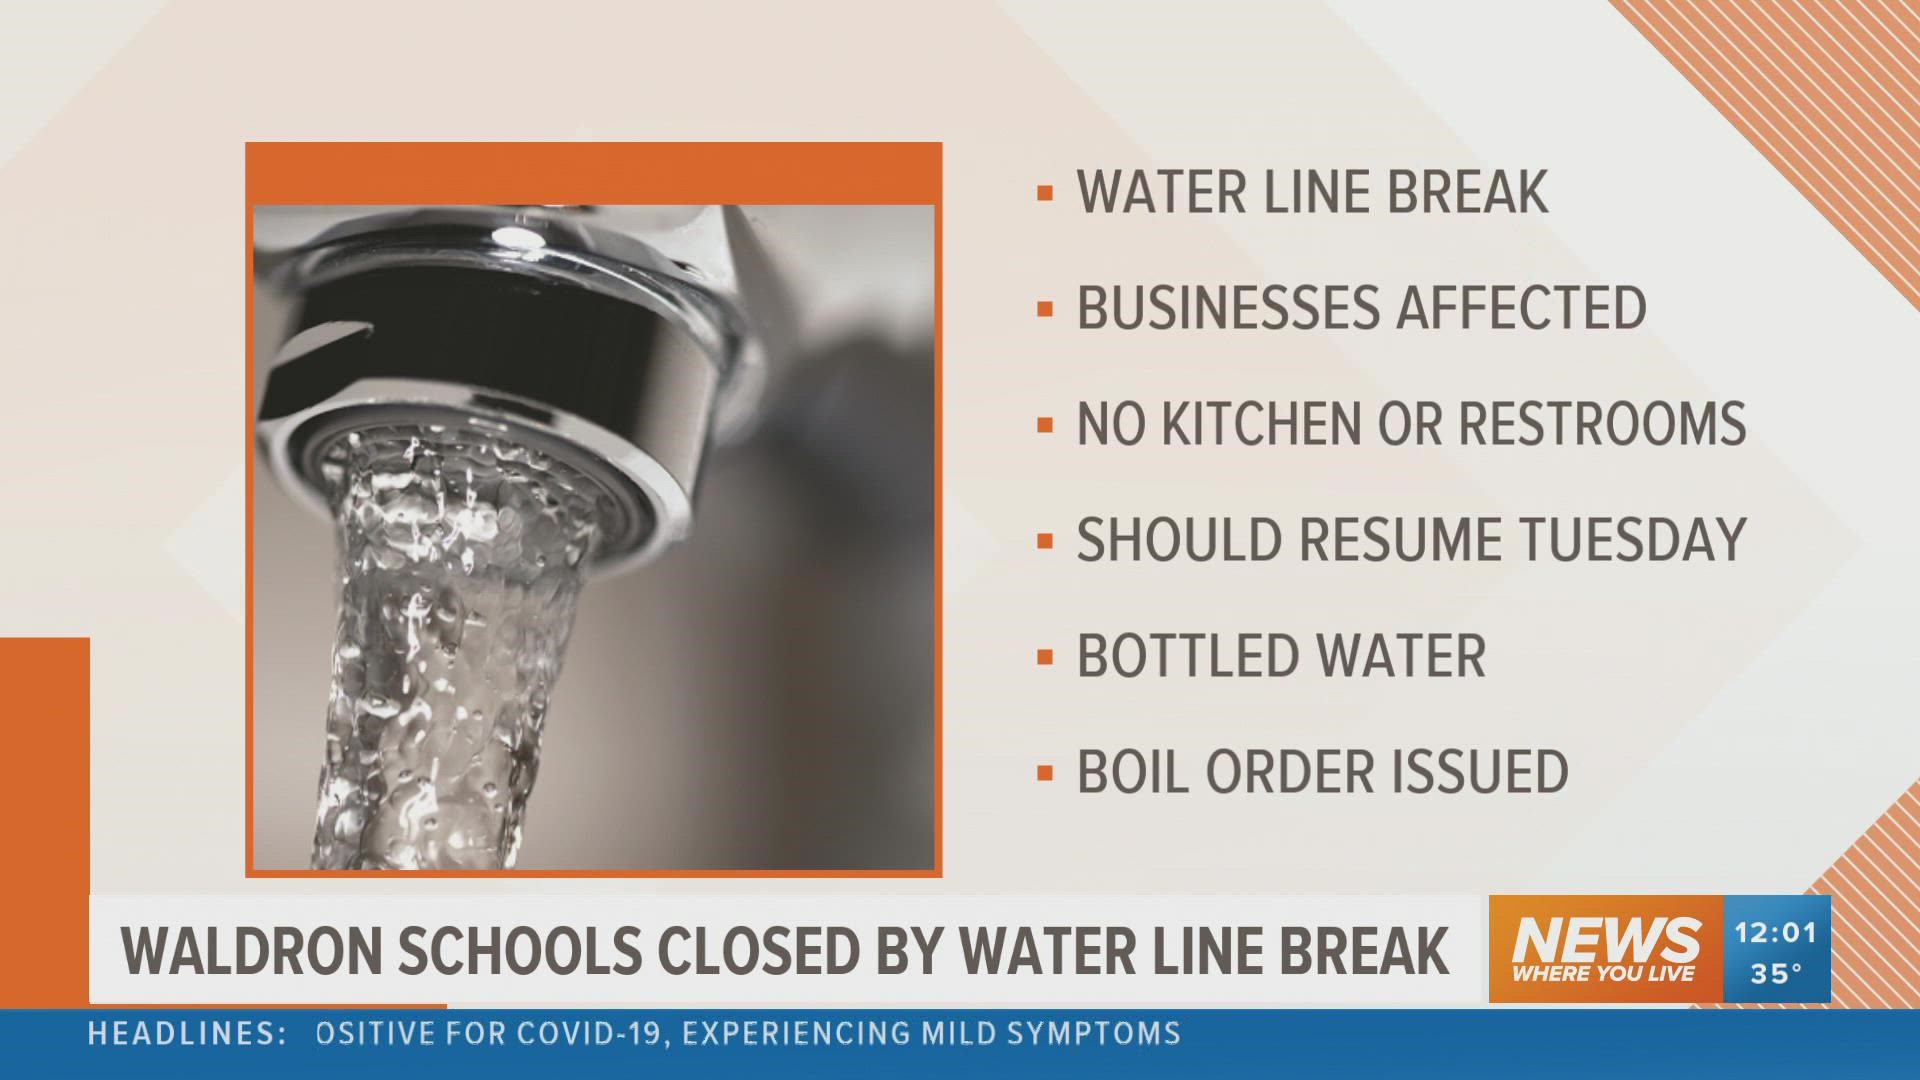 A boil order is in effect after a water line break closed some businesses and Waldron Schools Monday, Jan. 3.